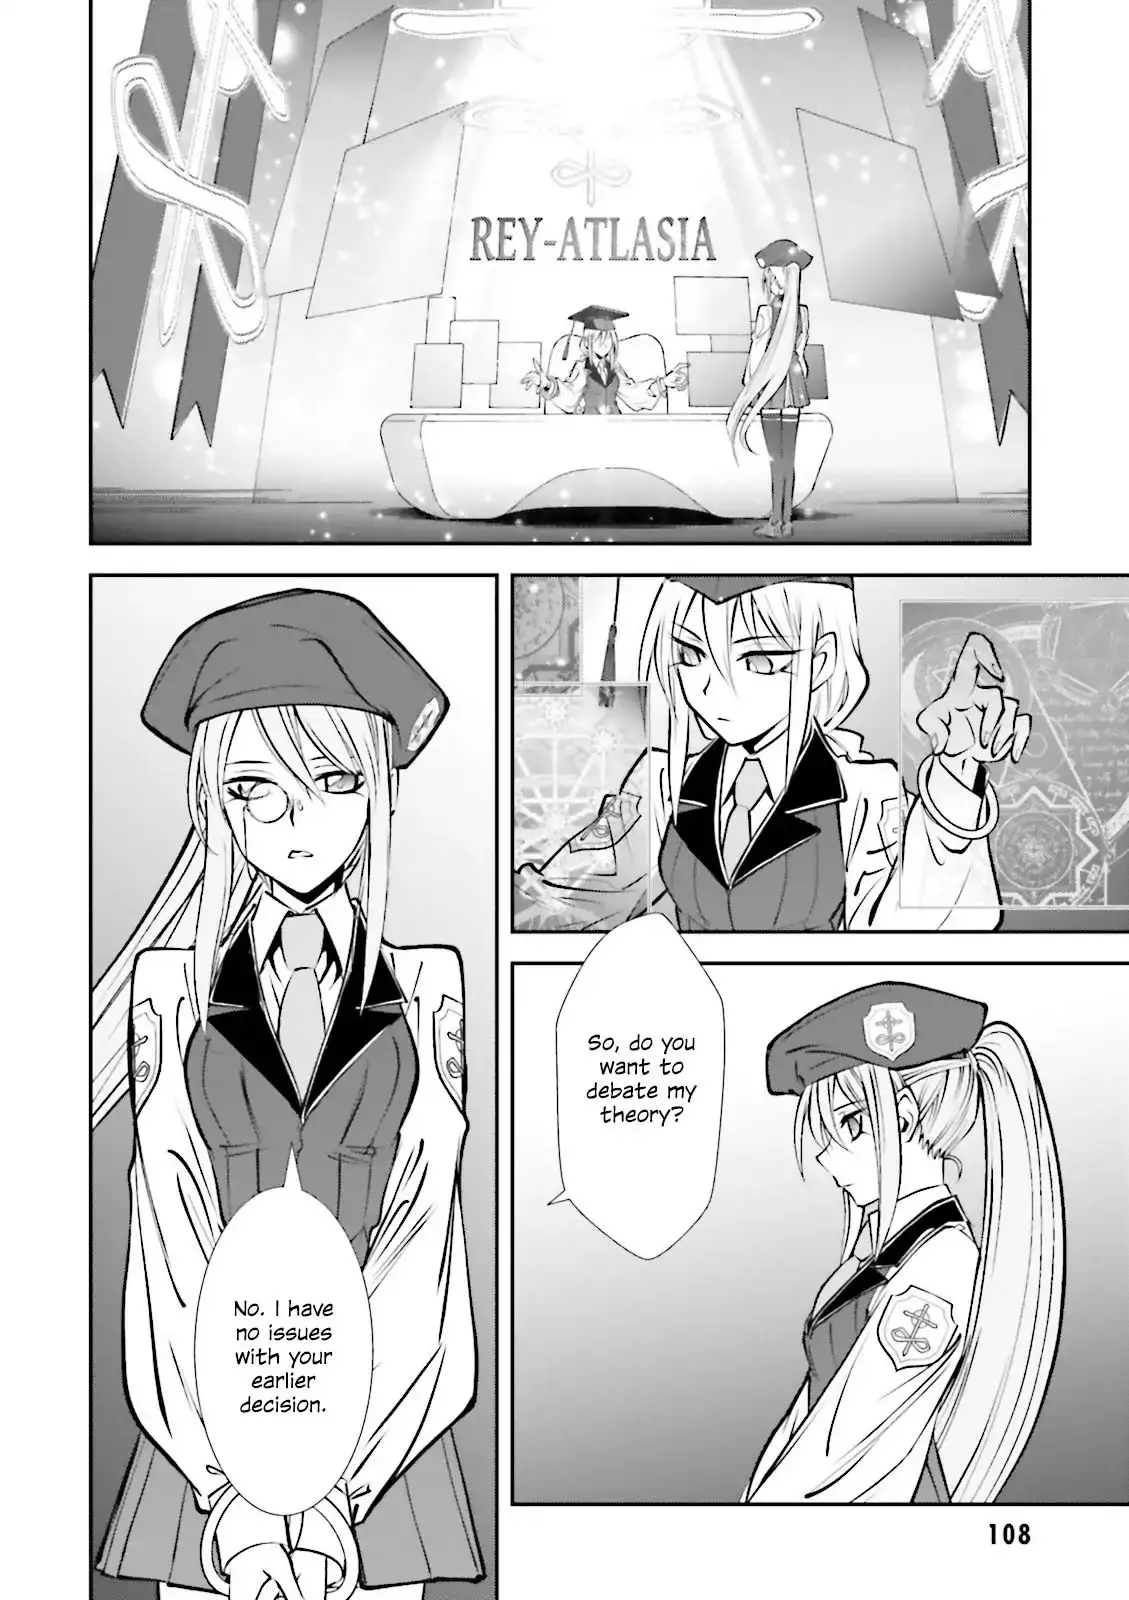 Melty Blood - Back Alley Alliance Nightmare - 3 page 18